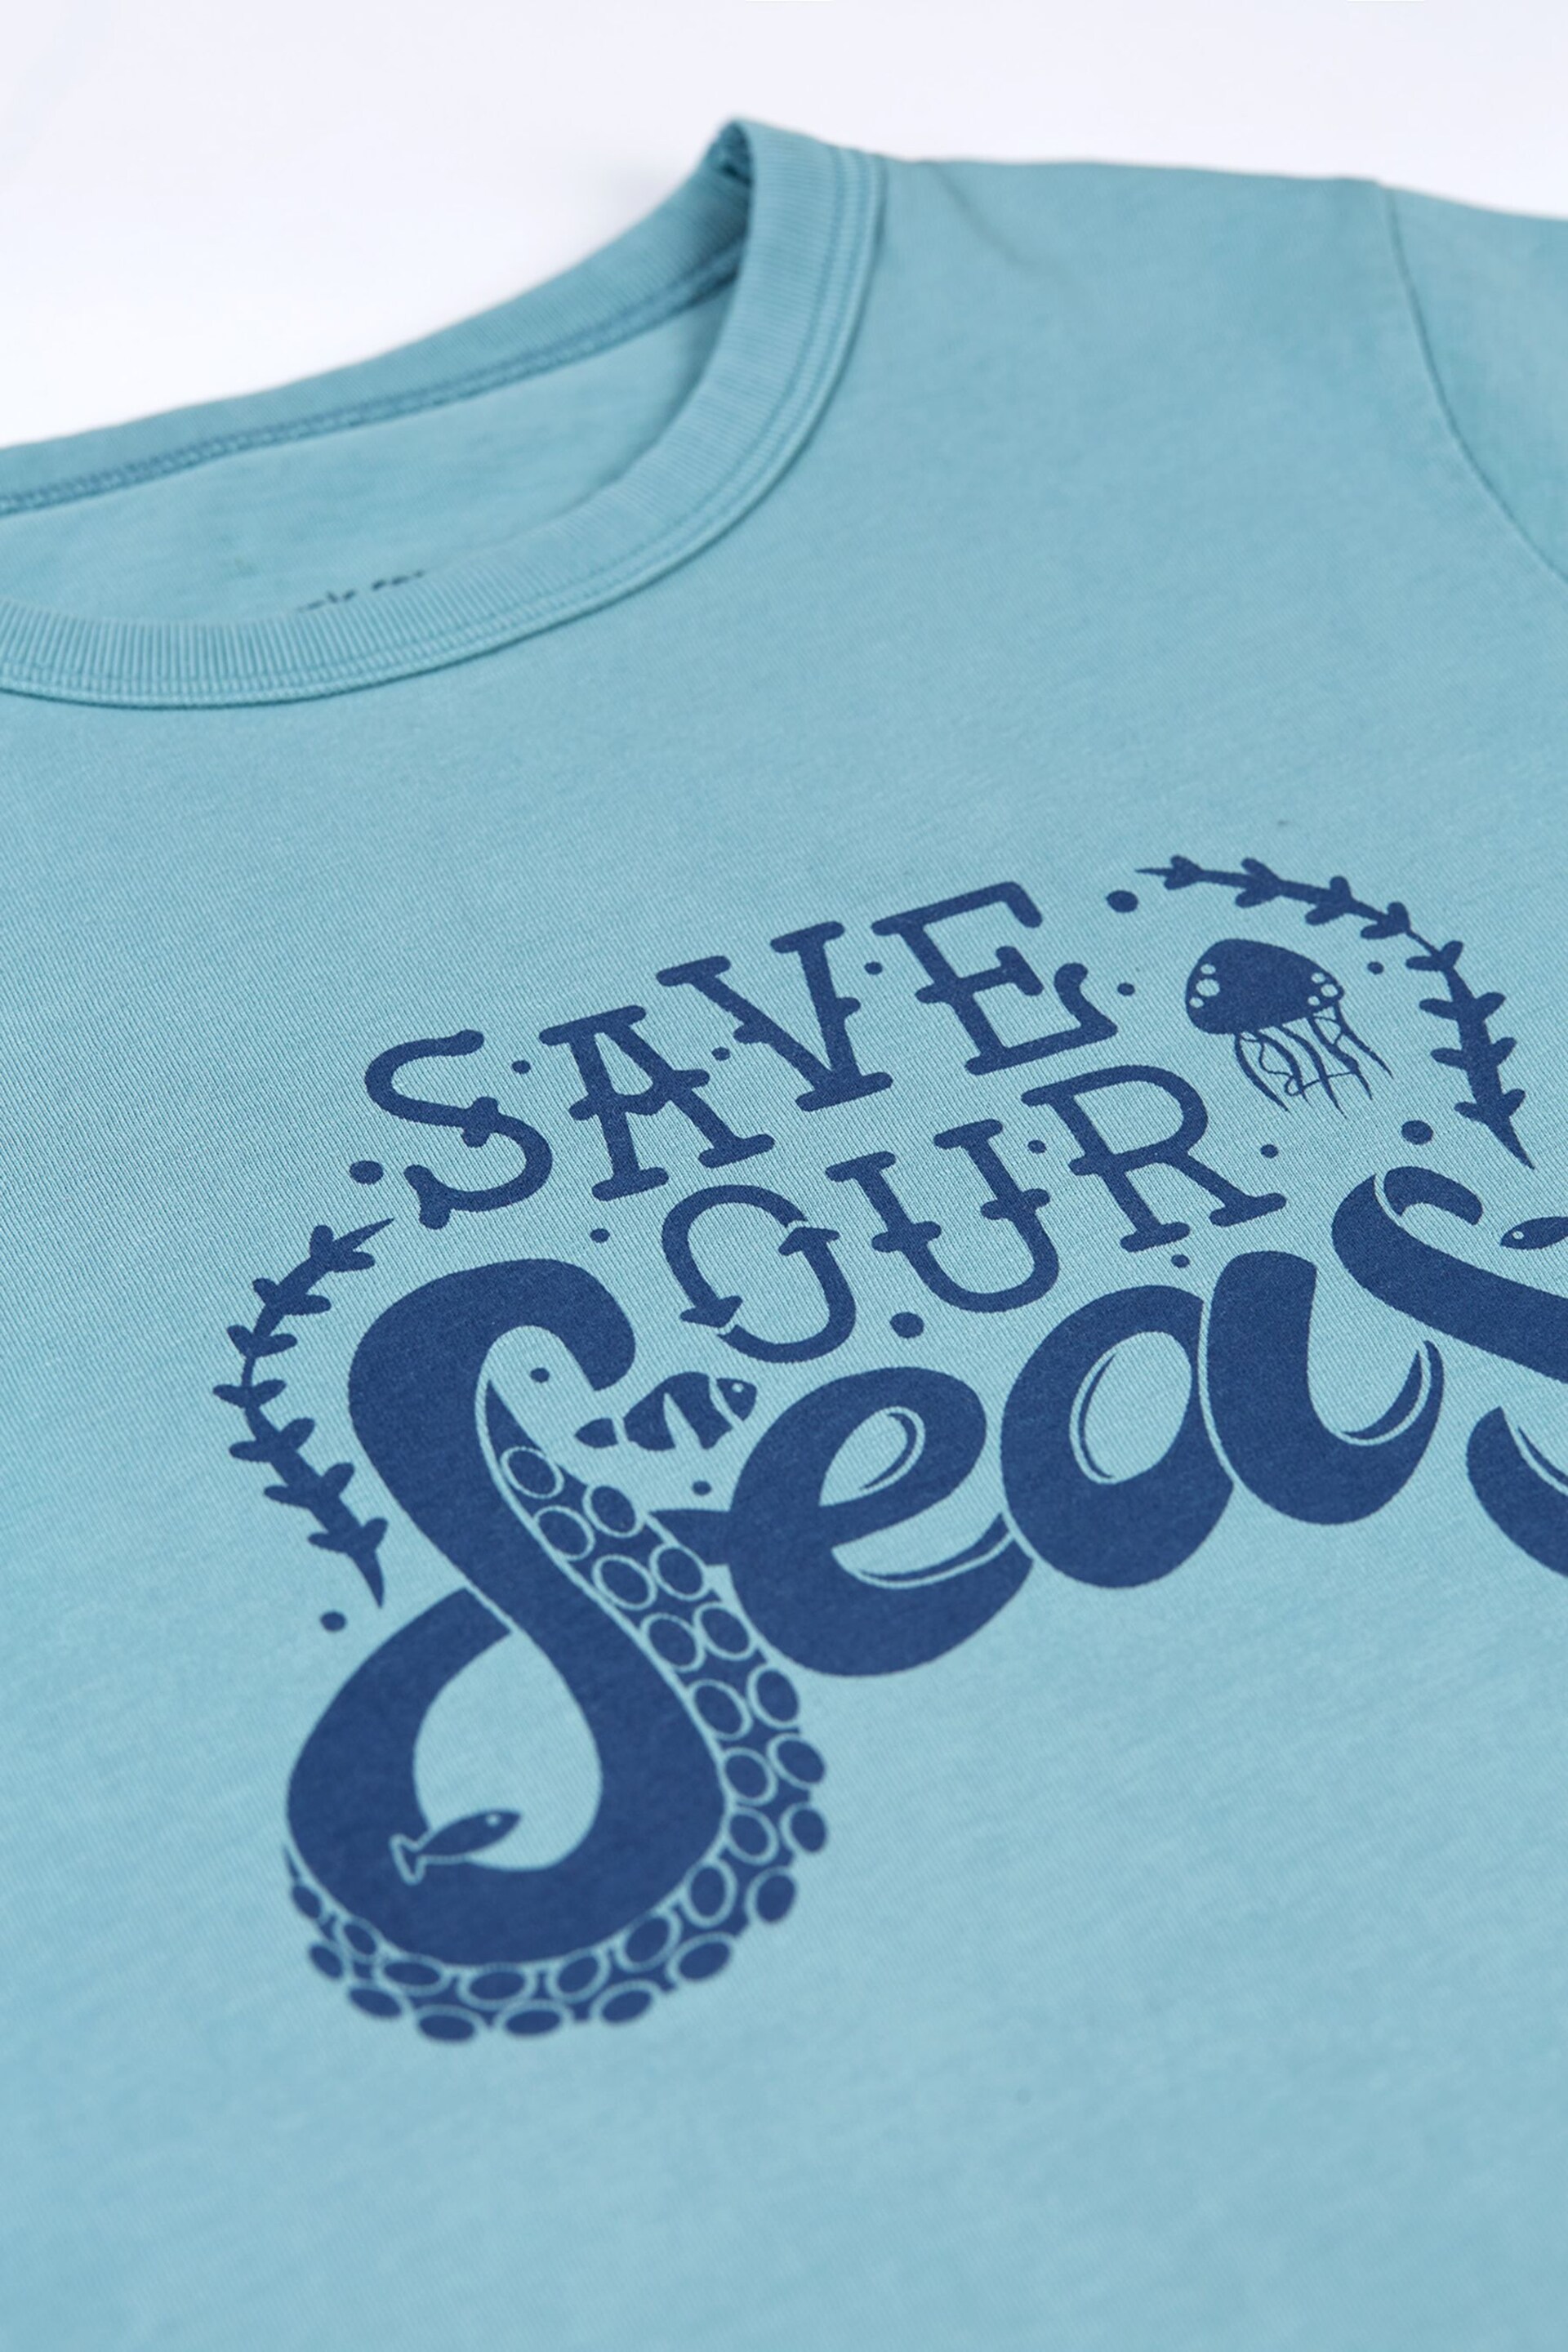 Frugi Blue Save Our Seas T-Shirt - Image 3 of 3